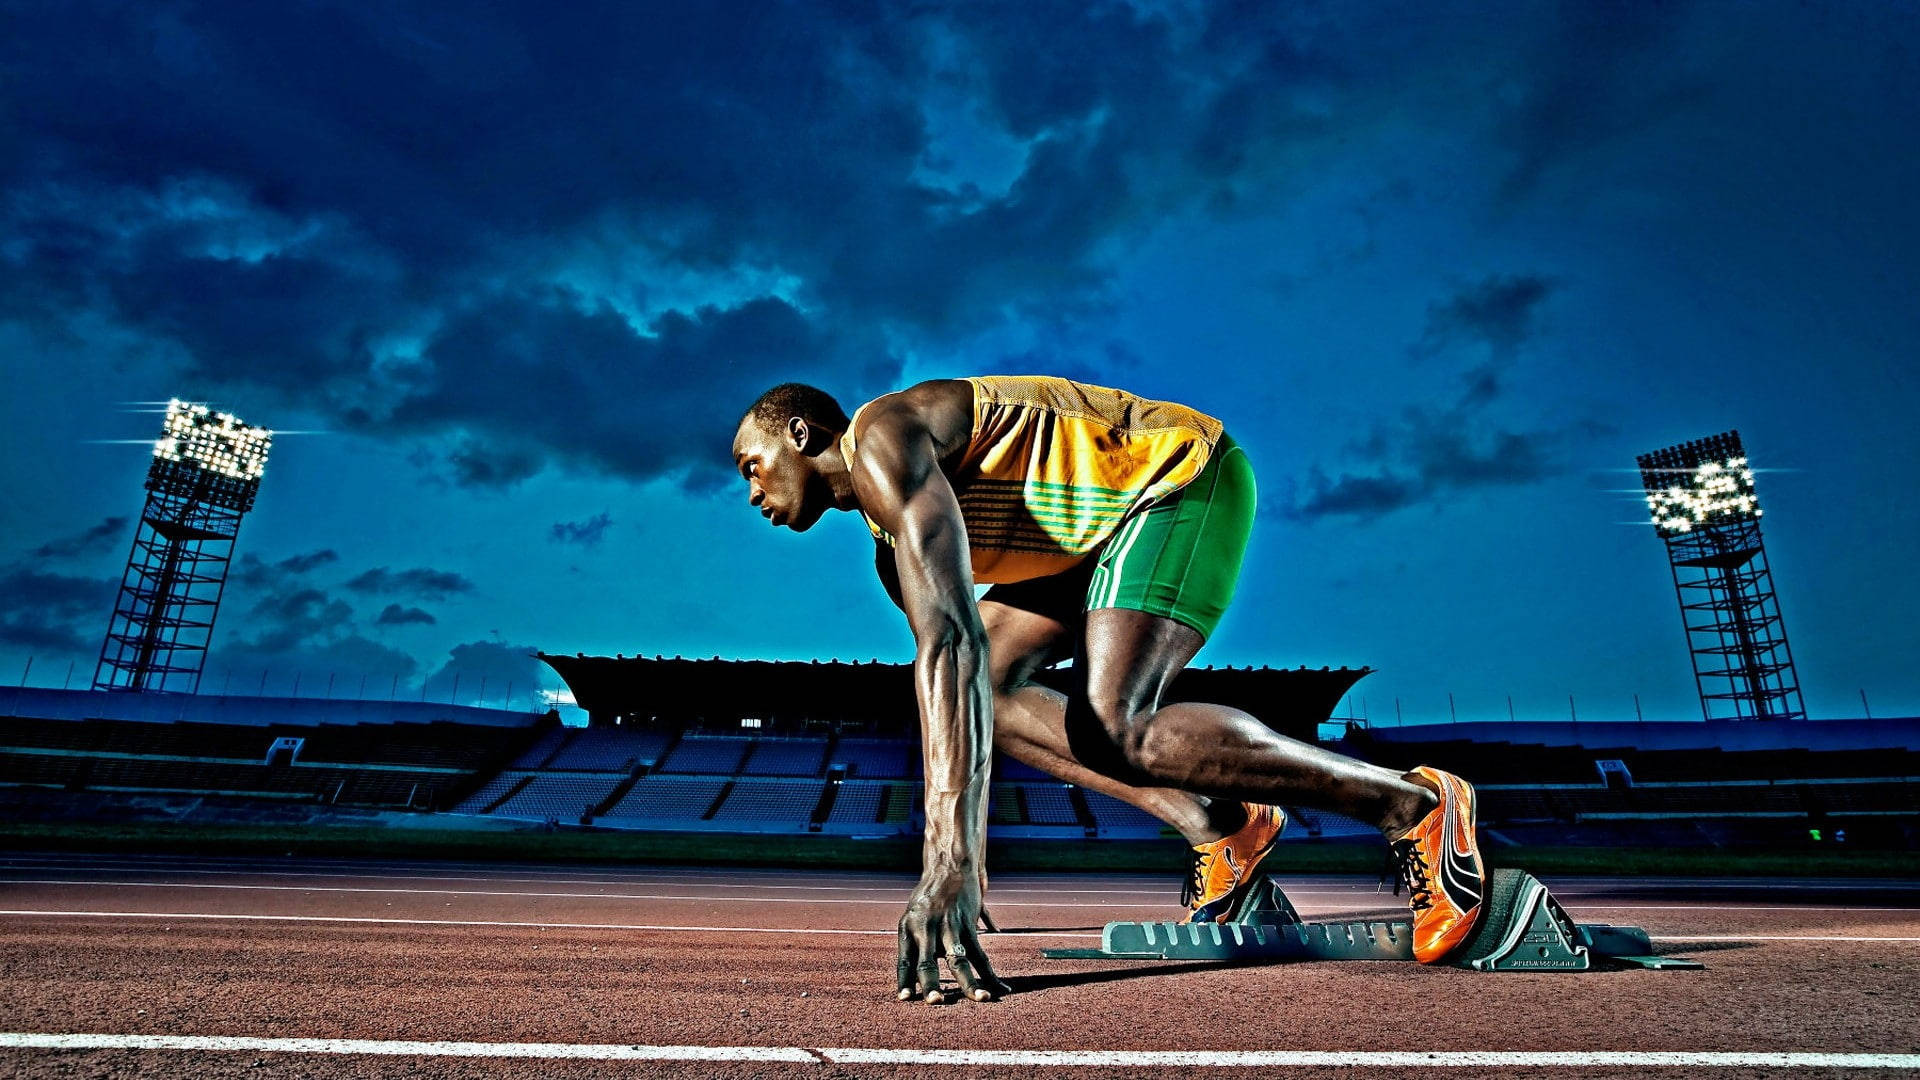 The Fastest Man Alive, Usain Bolt, Wins Yet Another Olympic Race